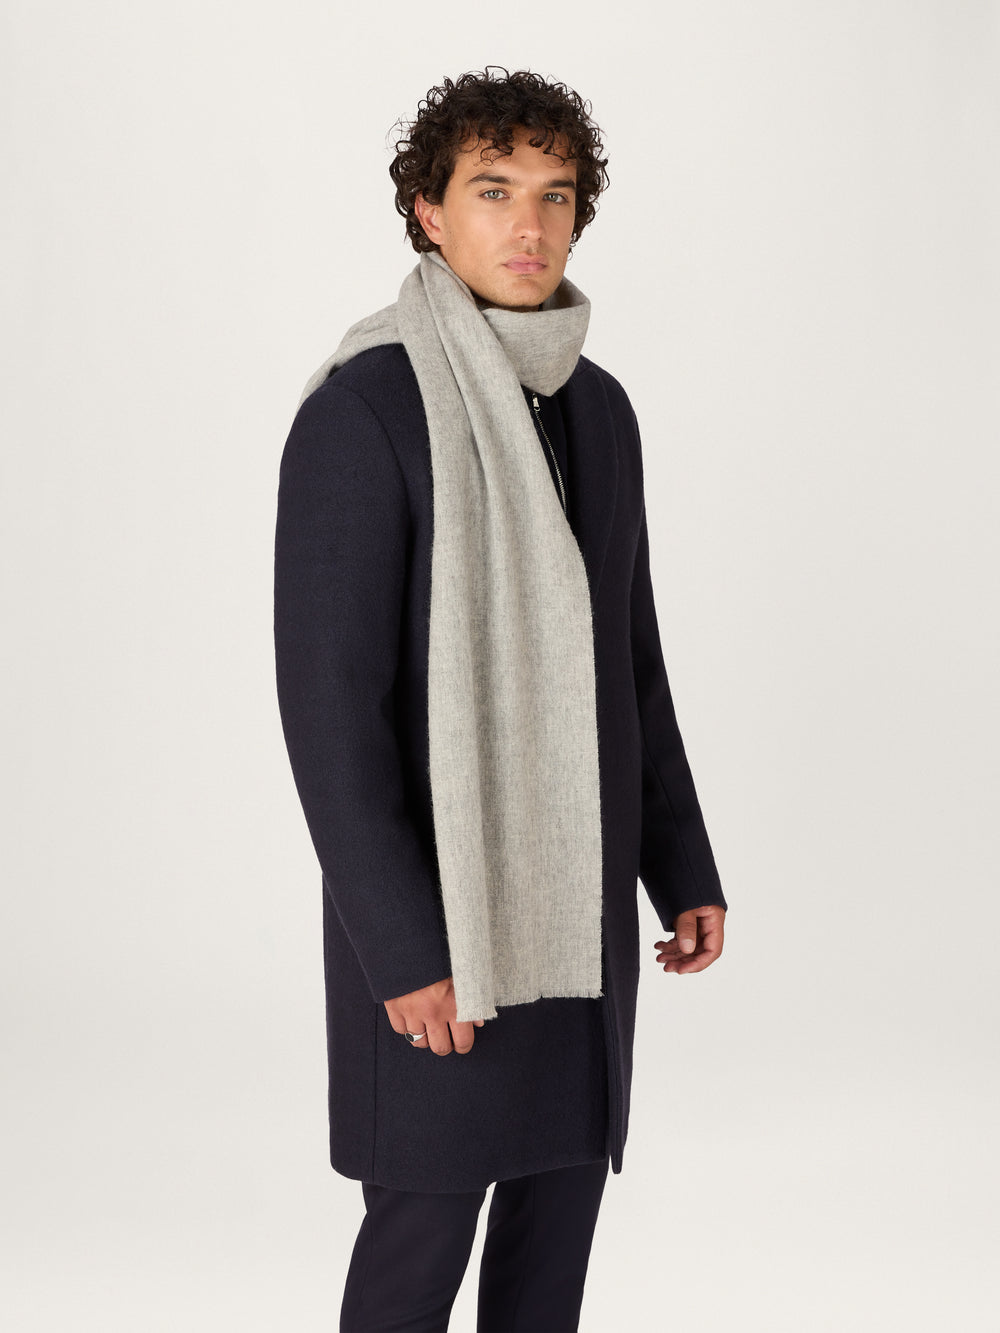 The Signature Scarf || Grey | Wool Cashmere